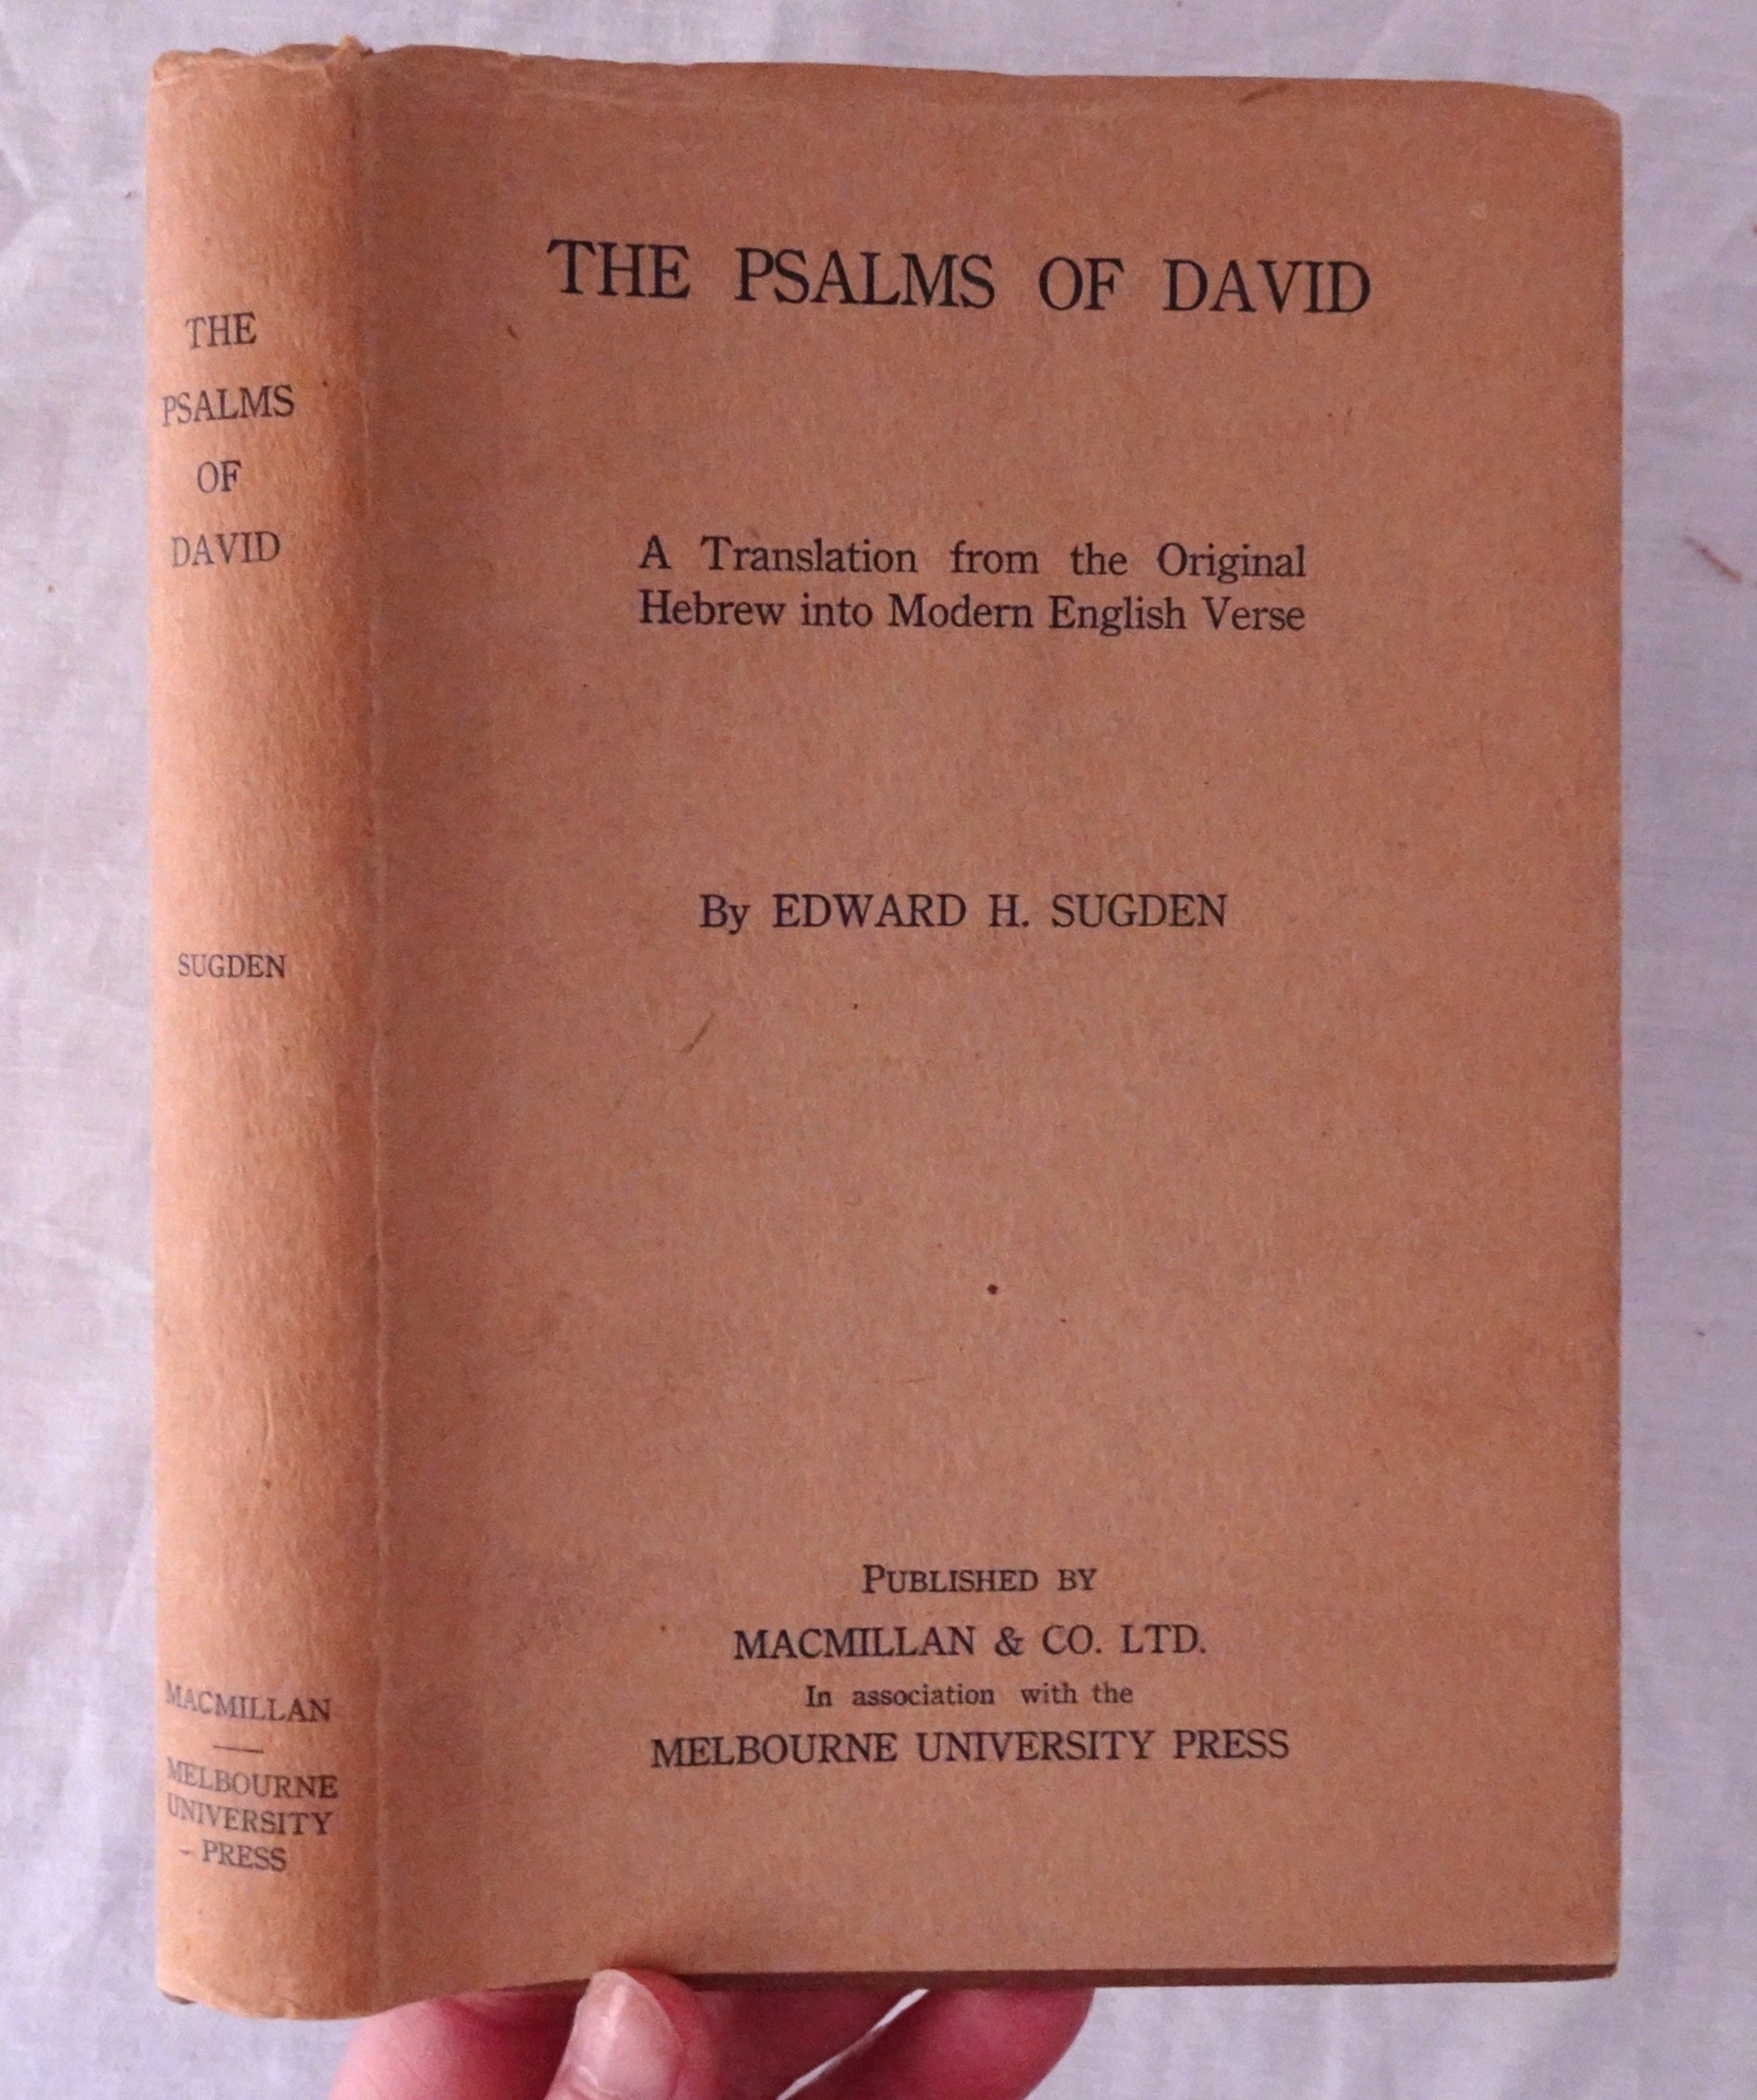 The Psalms of David  A Translation from the Original Hebrew into Modern English Verse  by Edward H. Sugden